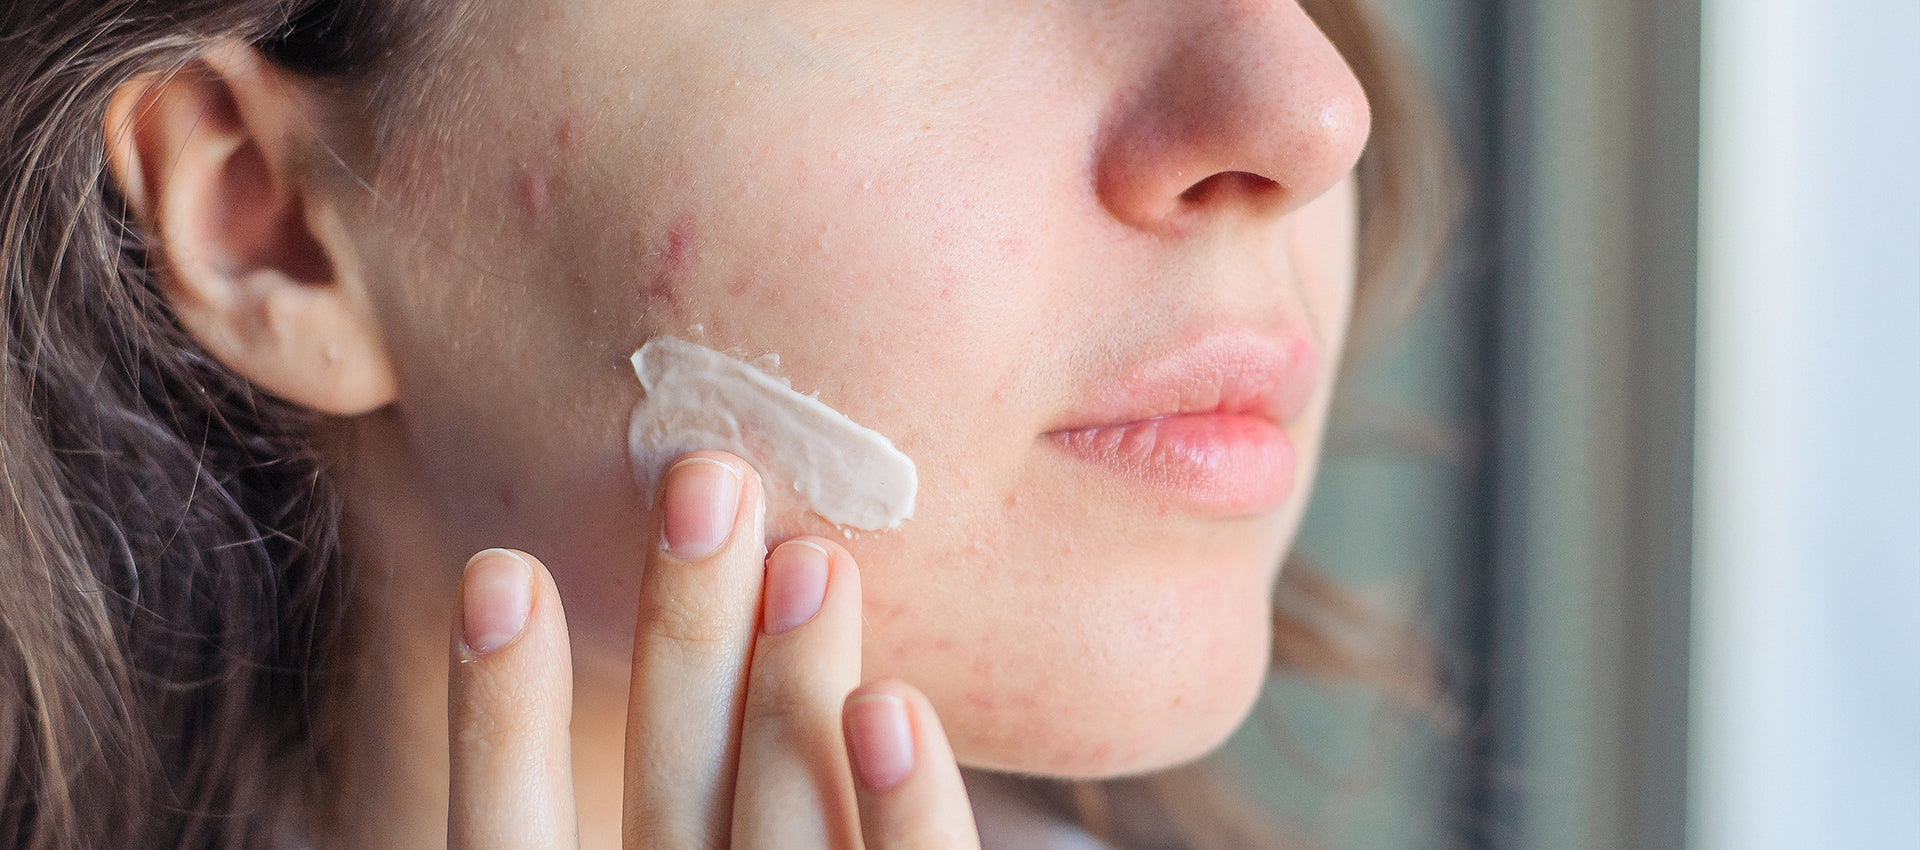 How much Salicylic Acid Is Right For Acne And Your Skin?